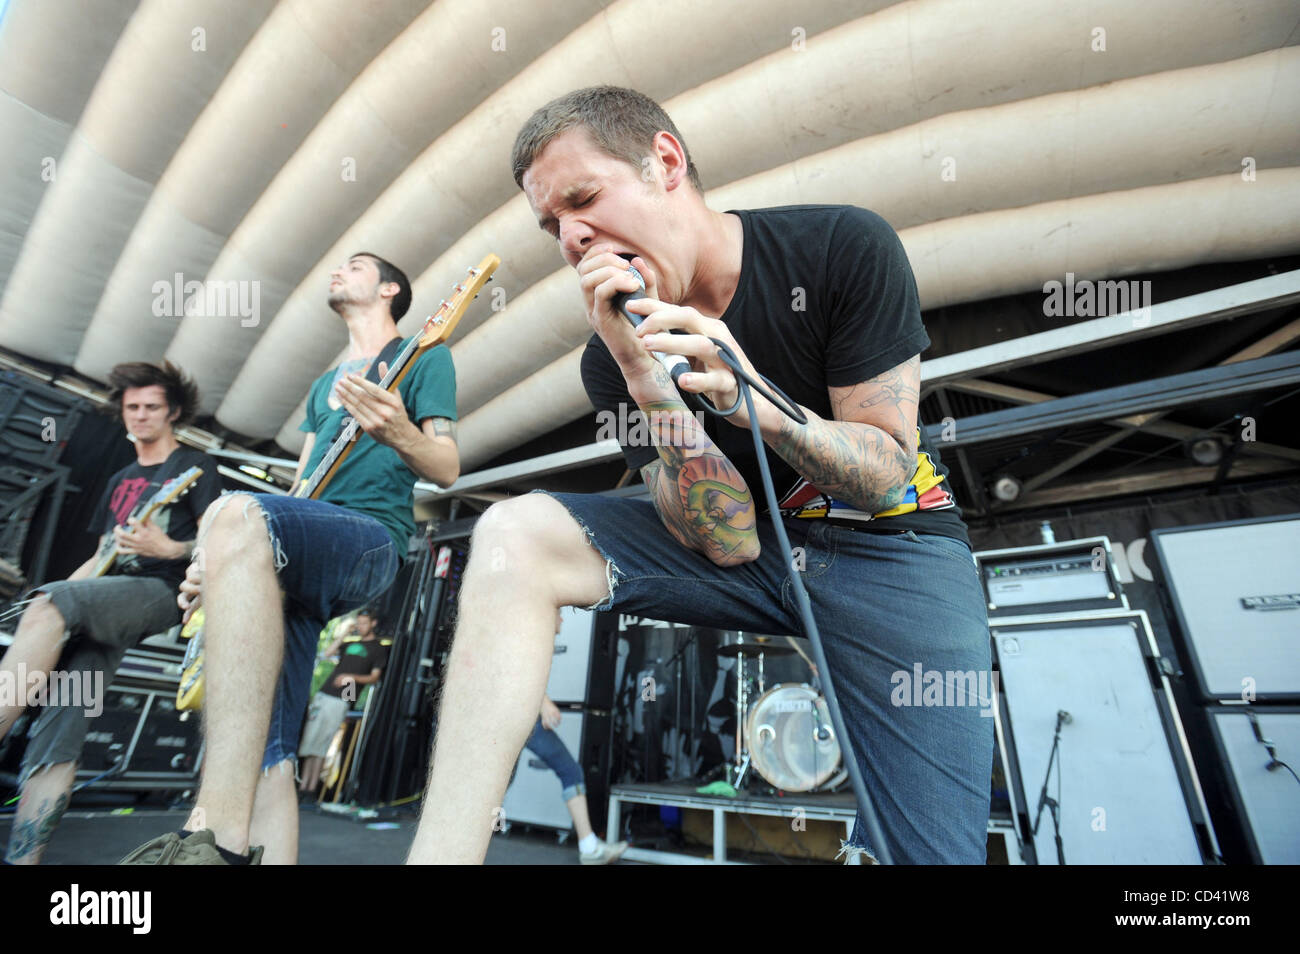 Jul 14, 2008 - Charlotte, North Carolina; USA - Musicians THE DEVIL WEARS  PRADA perform live as part of the 2008 Vans Warped Tour that took place at  the Verizon Wireless Amphitheatre